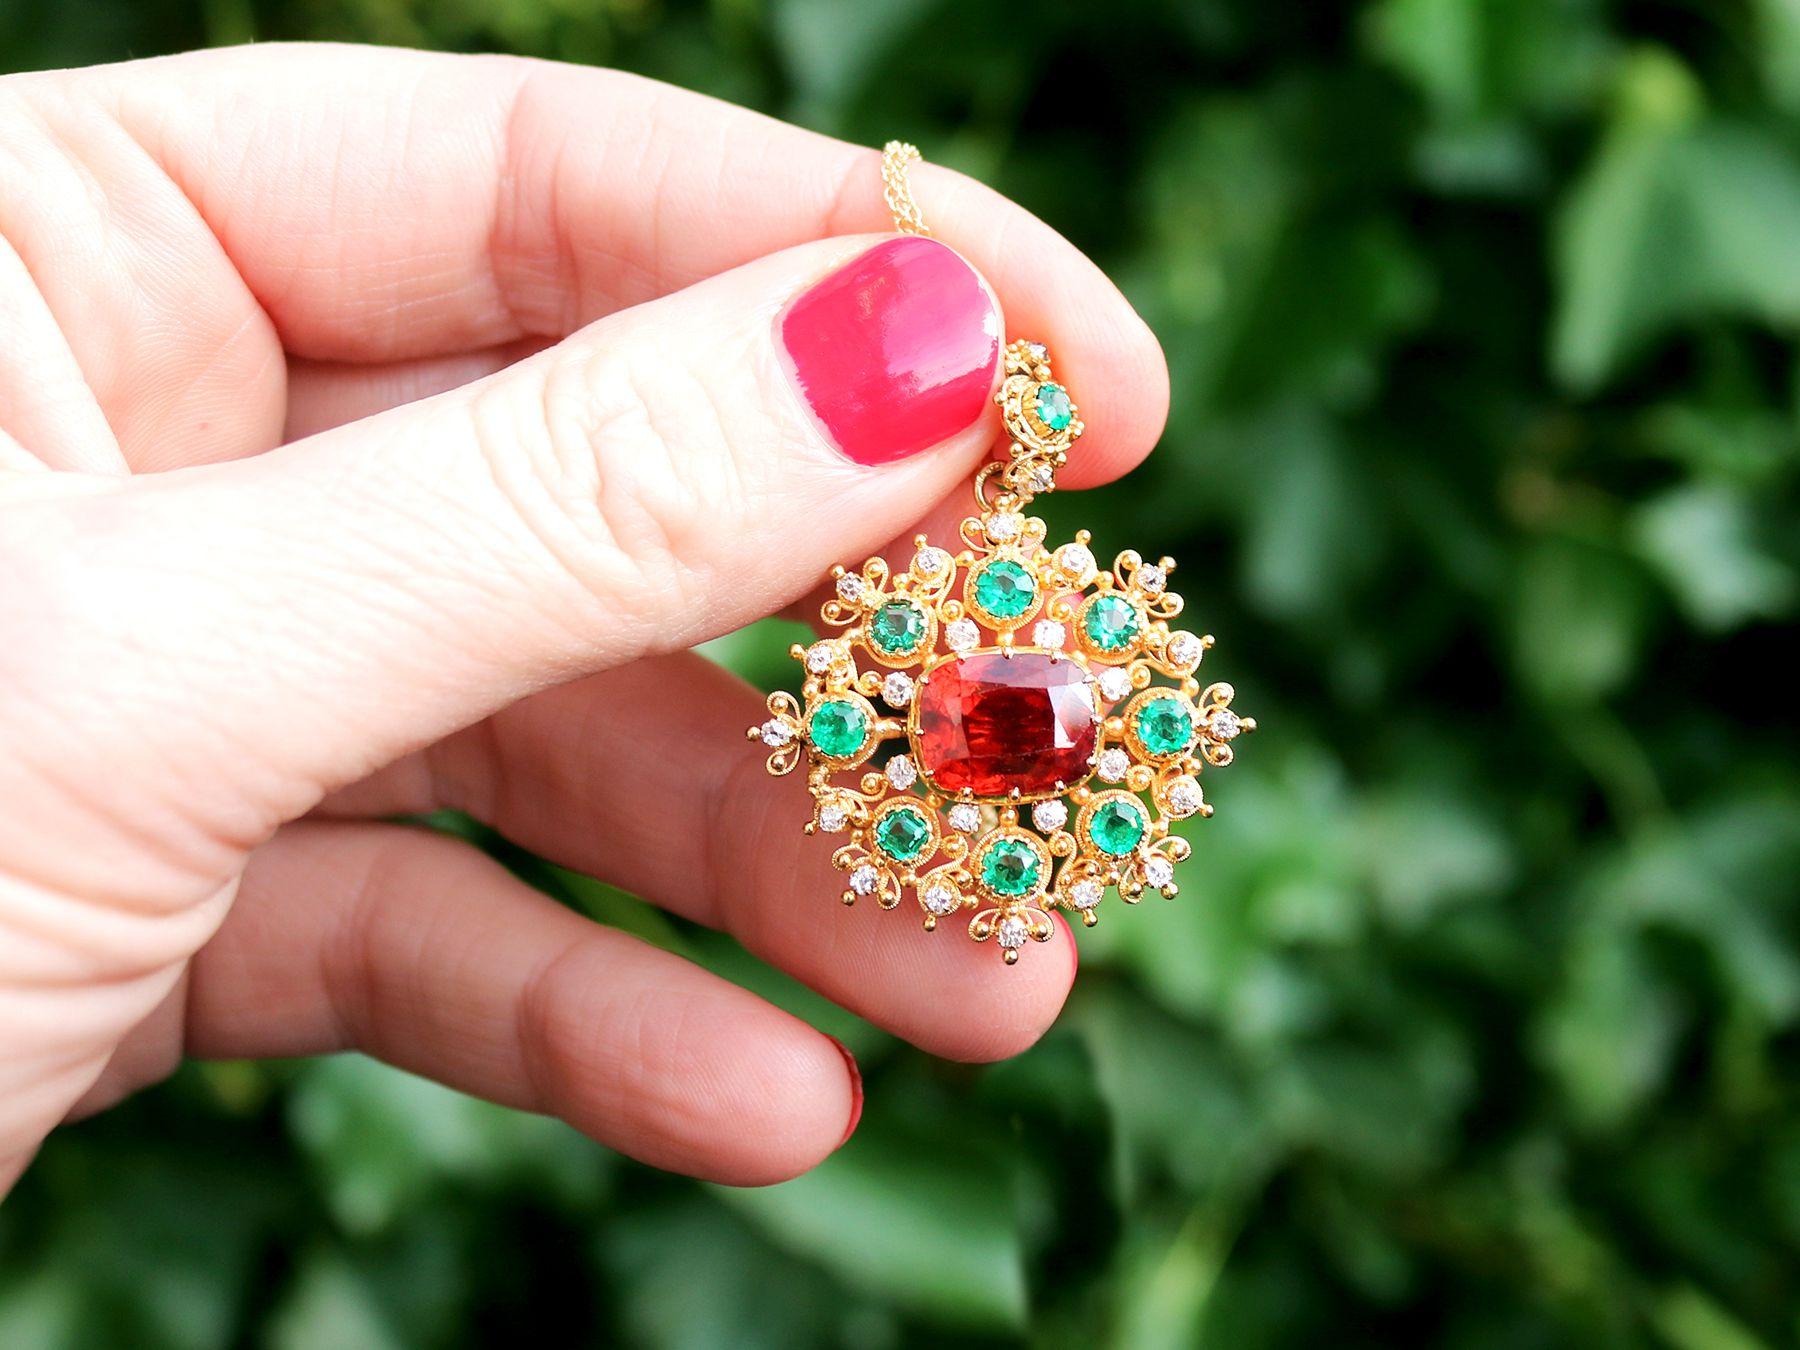 A stunning, fine and impressive Victorian 4.10 carat garnet, 1.36 carat emerald and 0.48 carat diamond, 18 karat yellow gold pendant/brooch; part of our diverse antique jewellery collections.

This stunning, fine and impressive antique pendant has